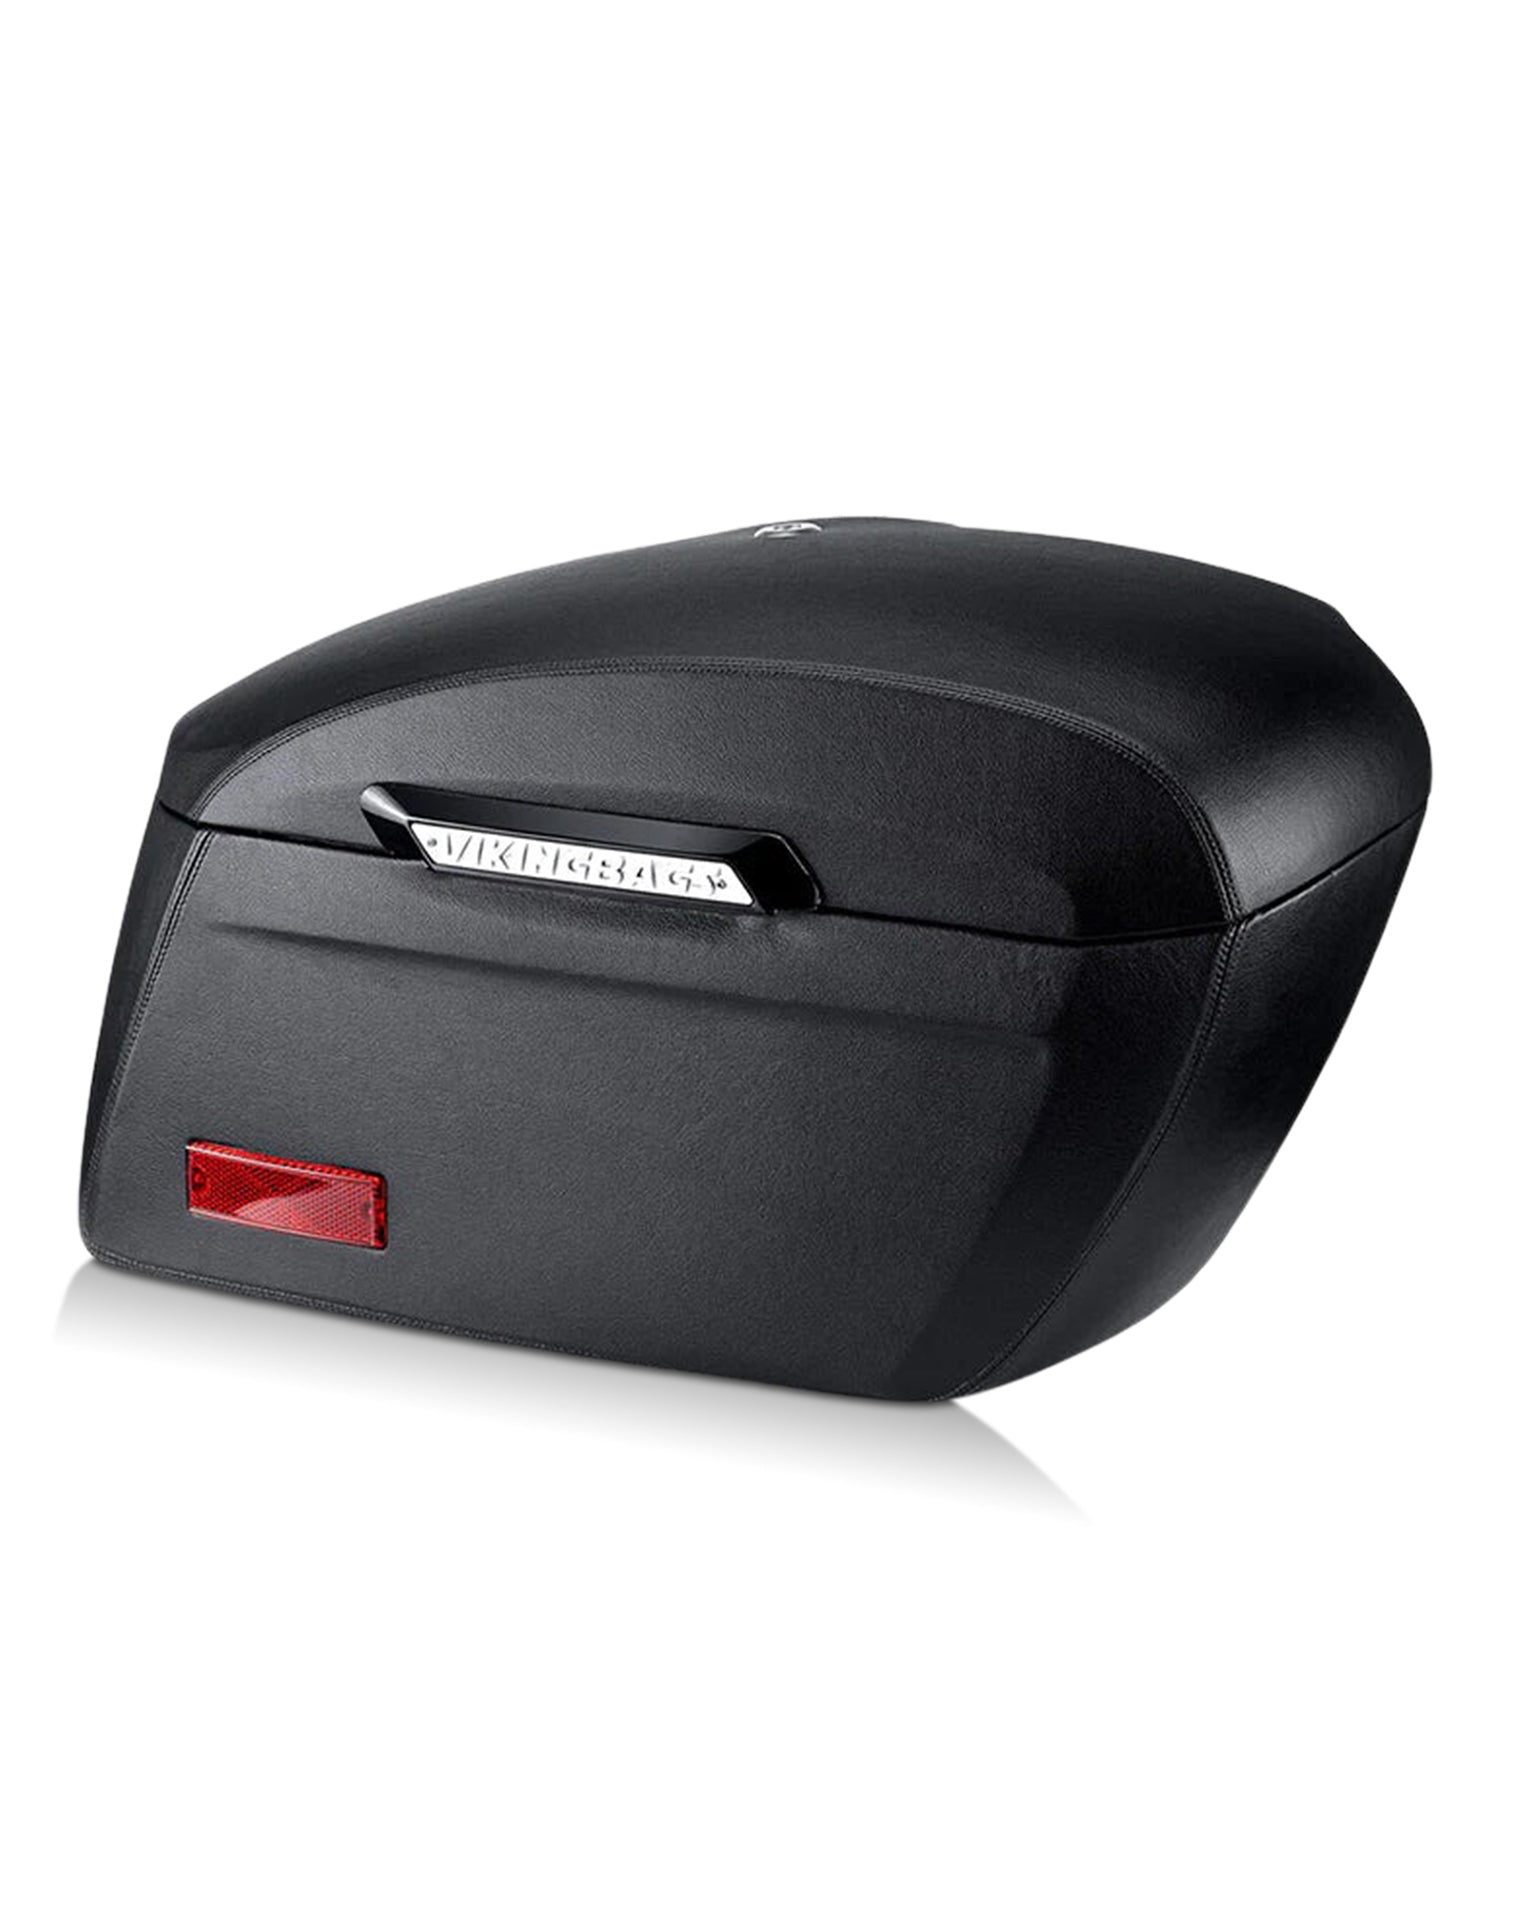 38L Lamellar Vale Extra Large Shock Cut-out Honda VTX 1800 C Leather Covered Motorcycle Hard Saddlebags Main View